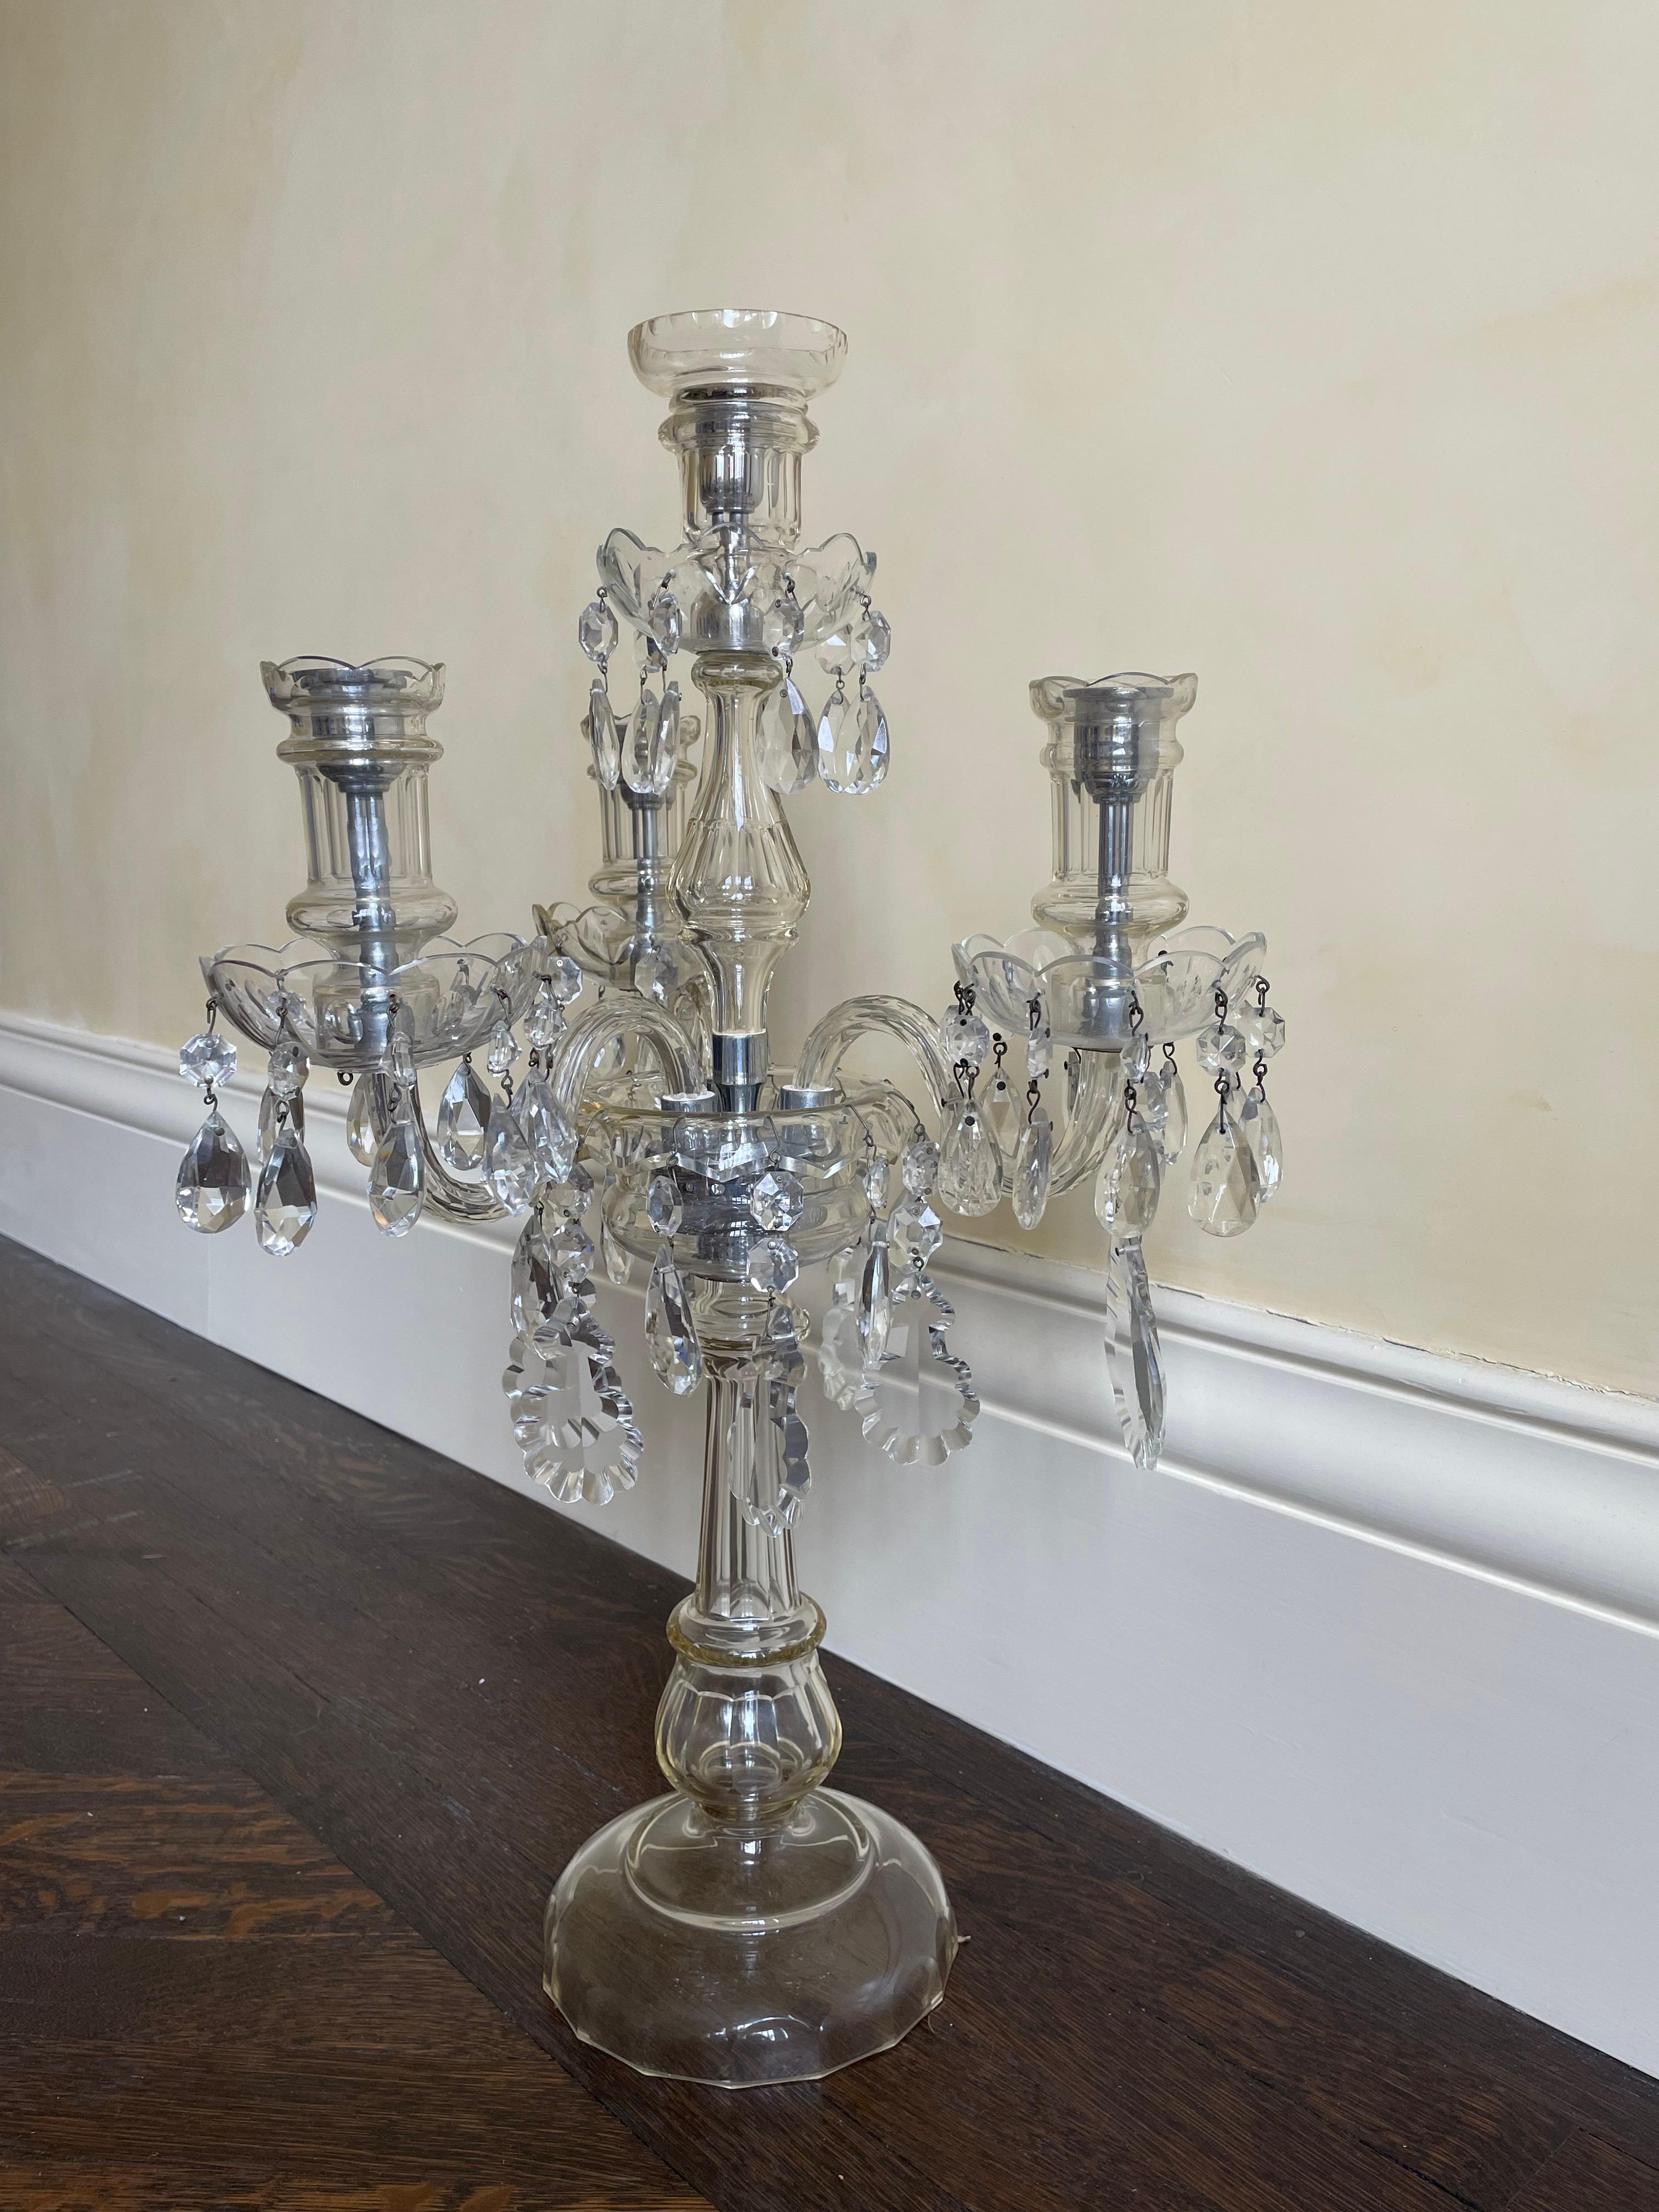 Early 20th Century Georgian Anglo-Irish Style 4-light crystal and silver candelabrum with faceted prisms and etched bobeches. Estate of Harold S. Vanderbilt, formerly 